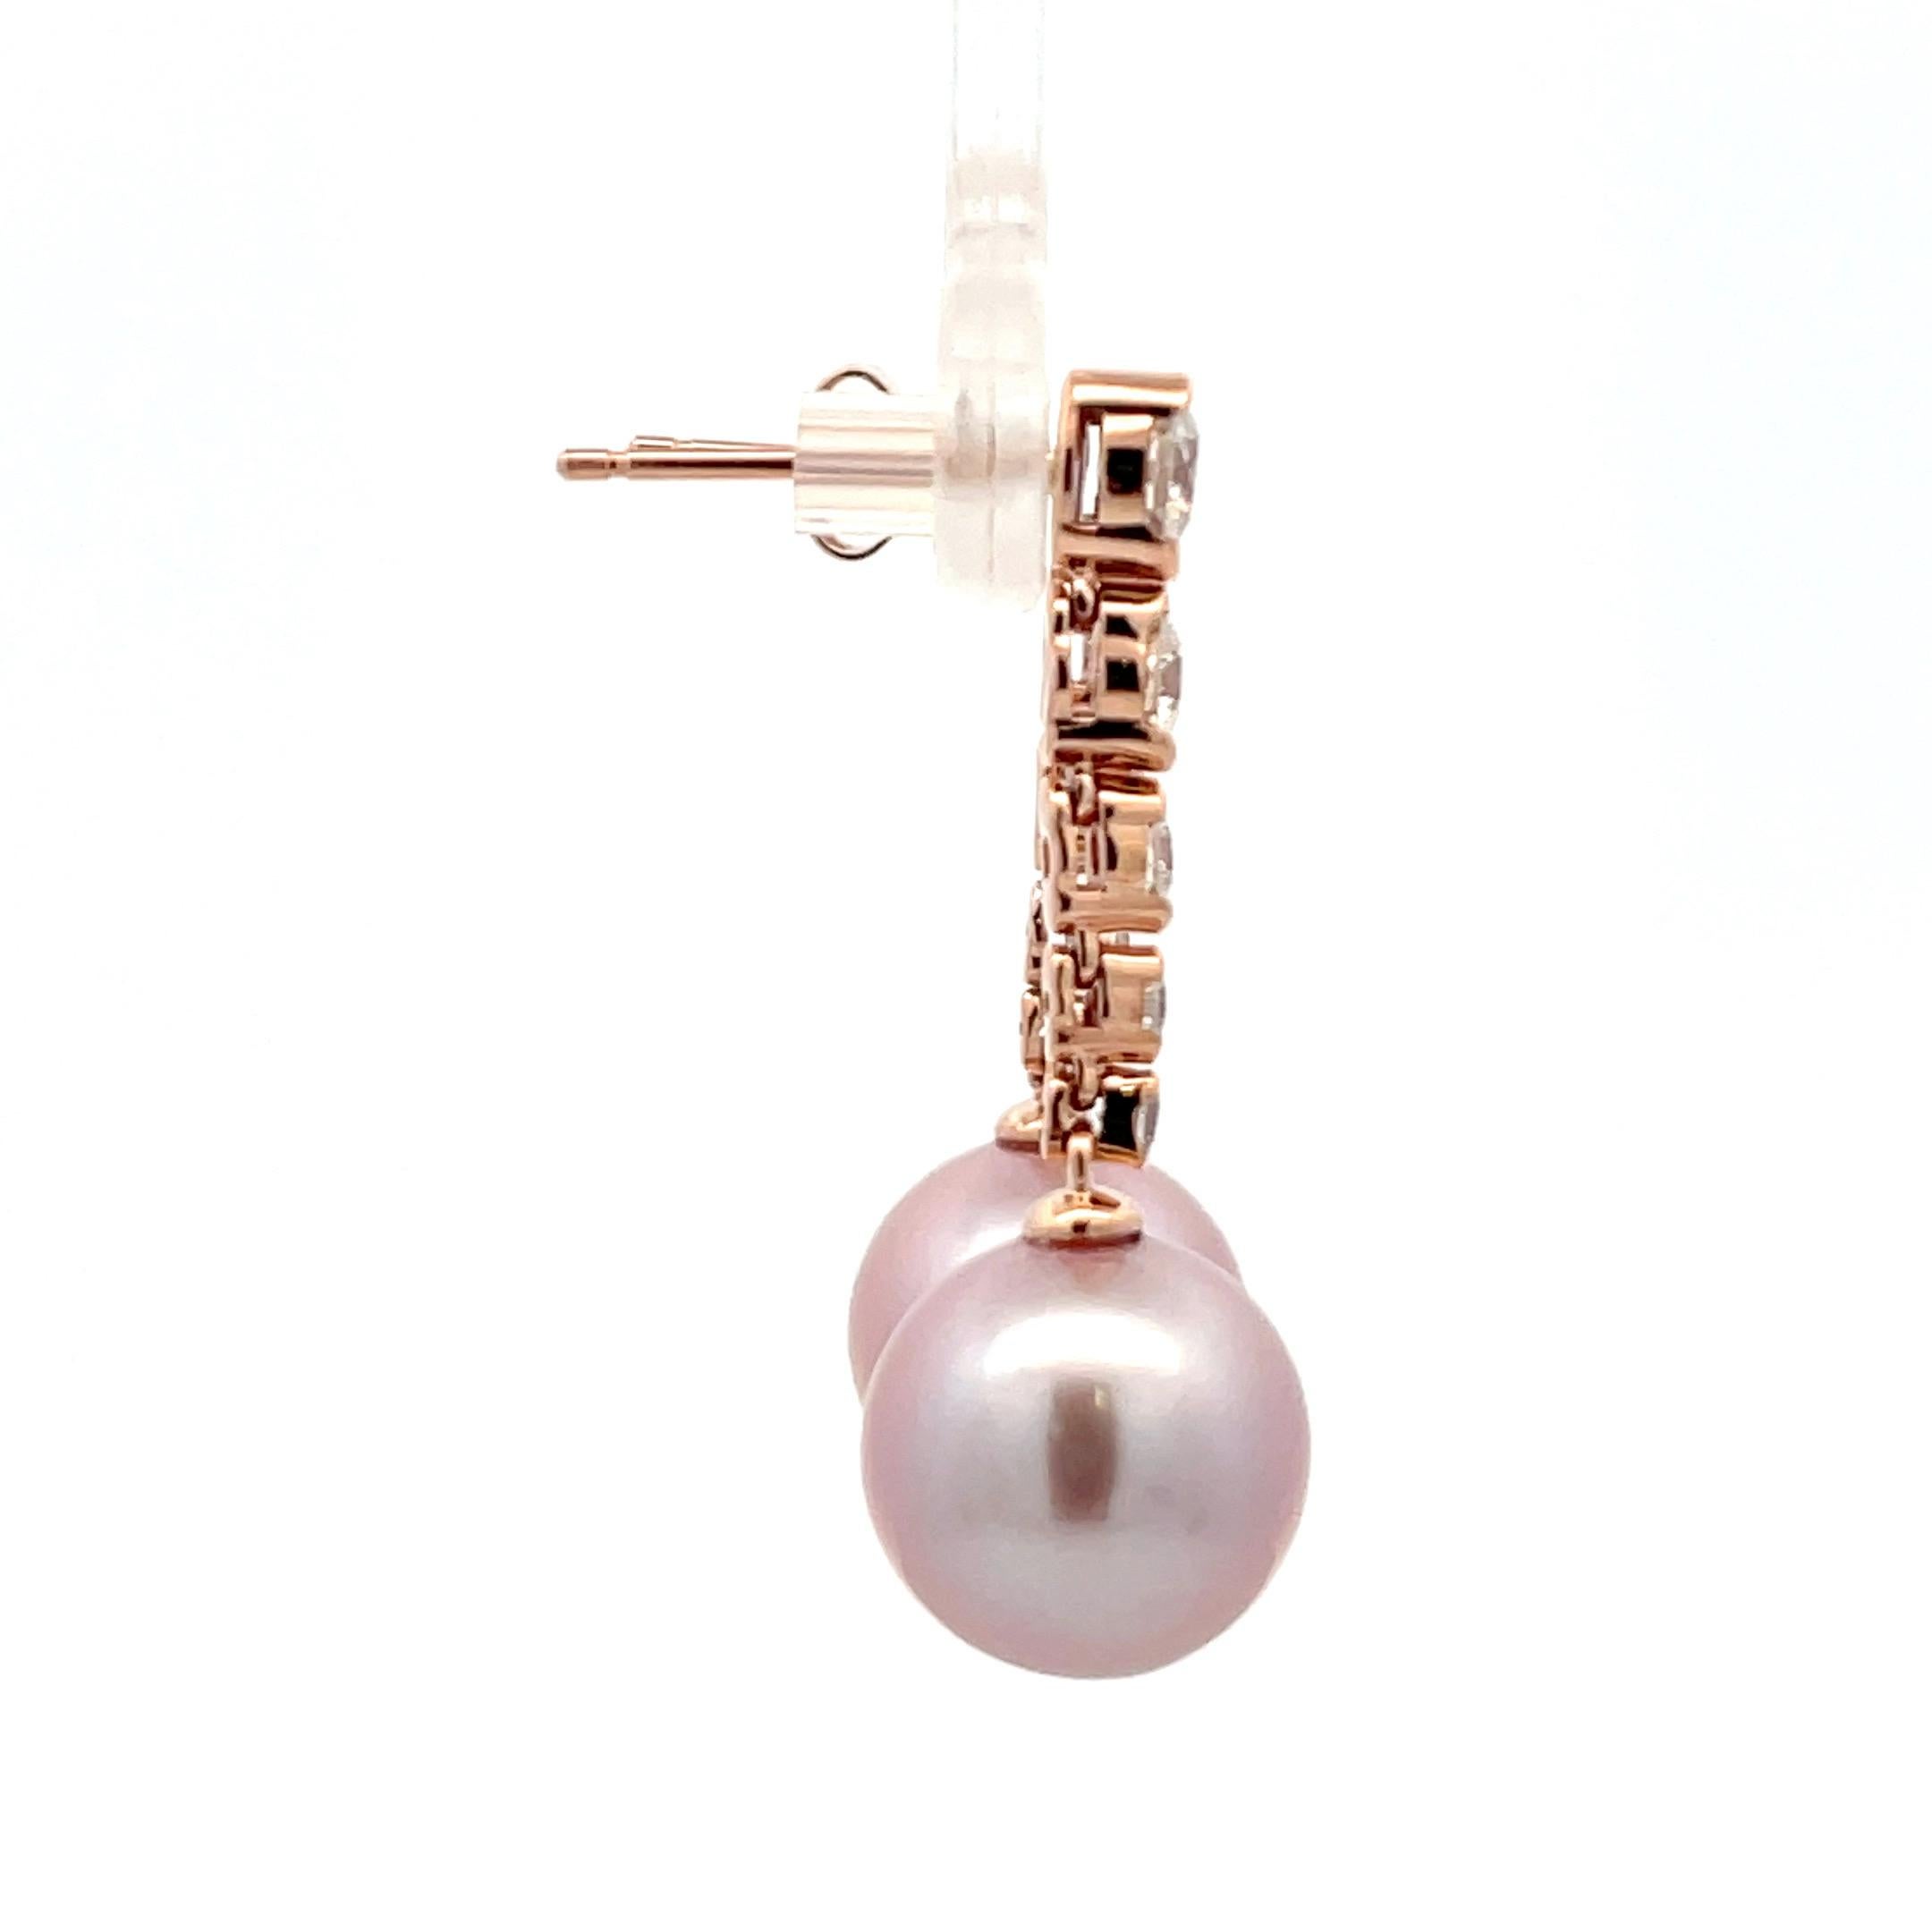 14 karat rose gold drop earrings featuring 10 round brilliant weighing 0.76 carrots and two pink freshwater pearls measuring 10– 11 mm
Color G
Clarity SI